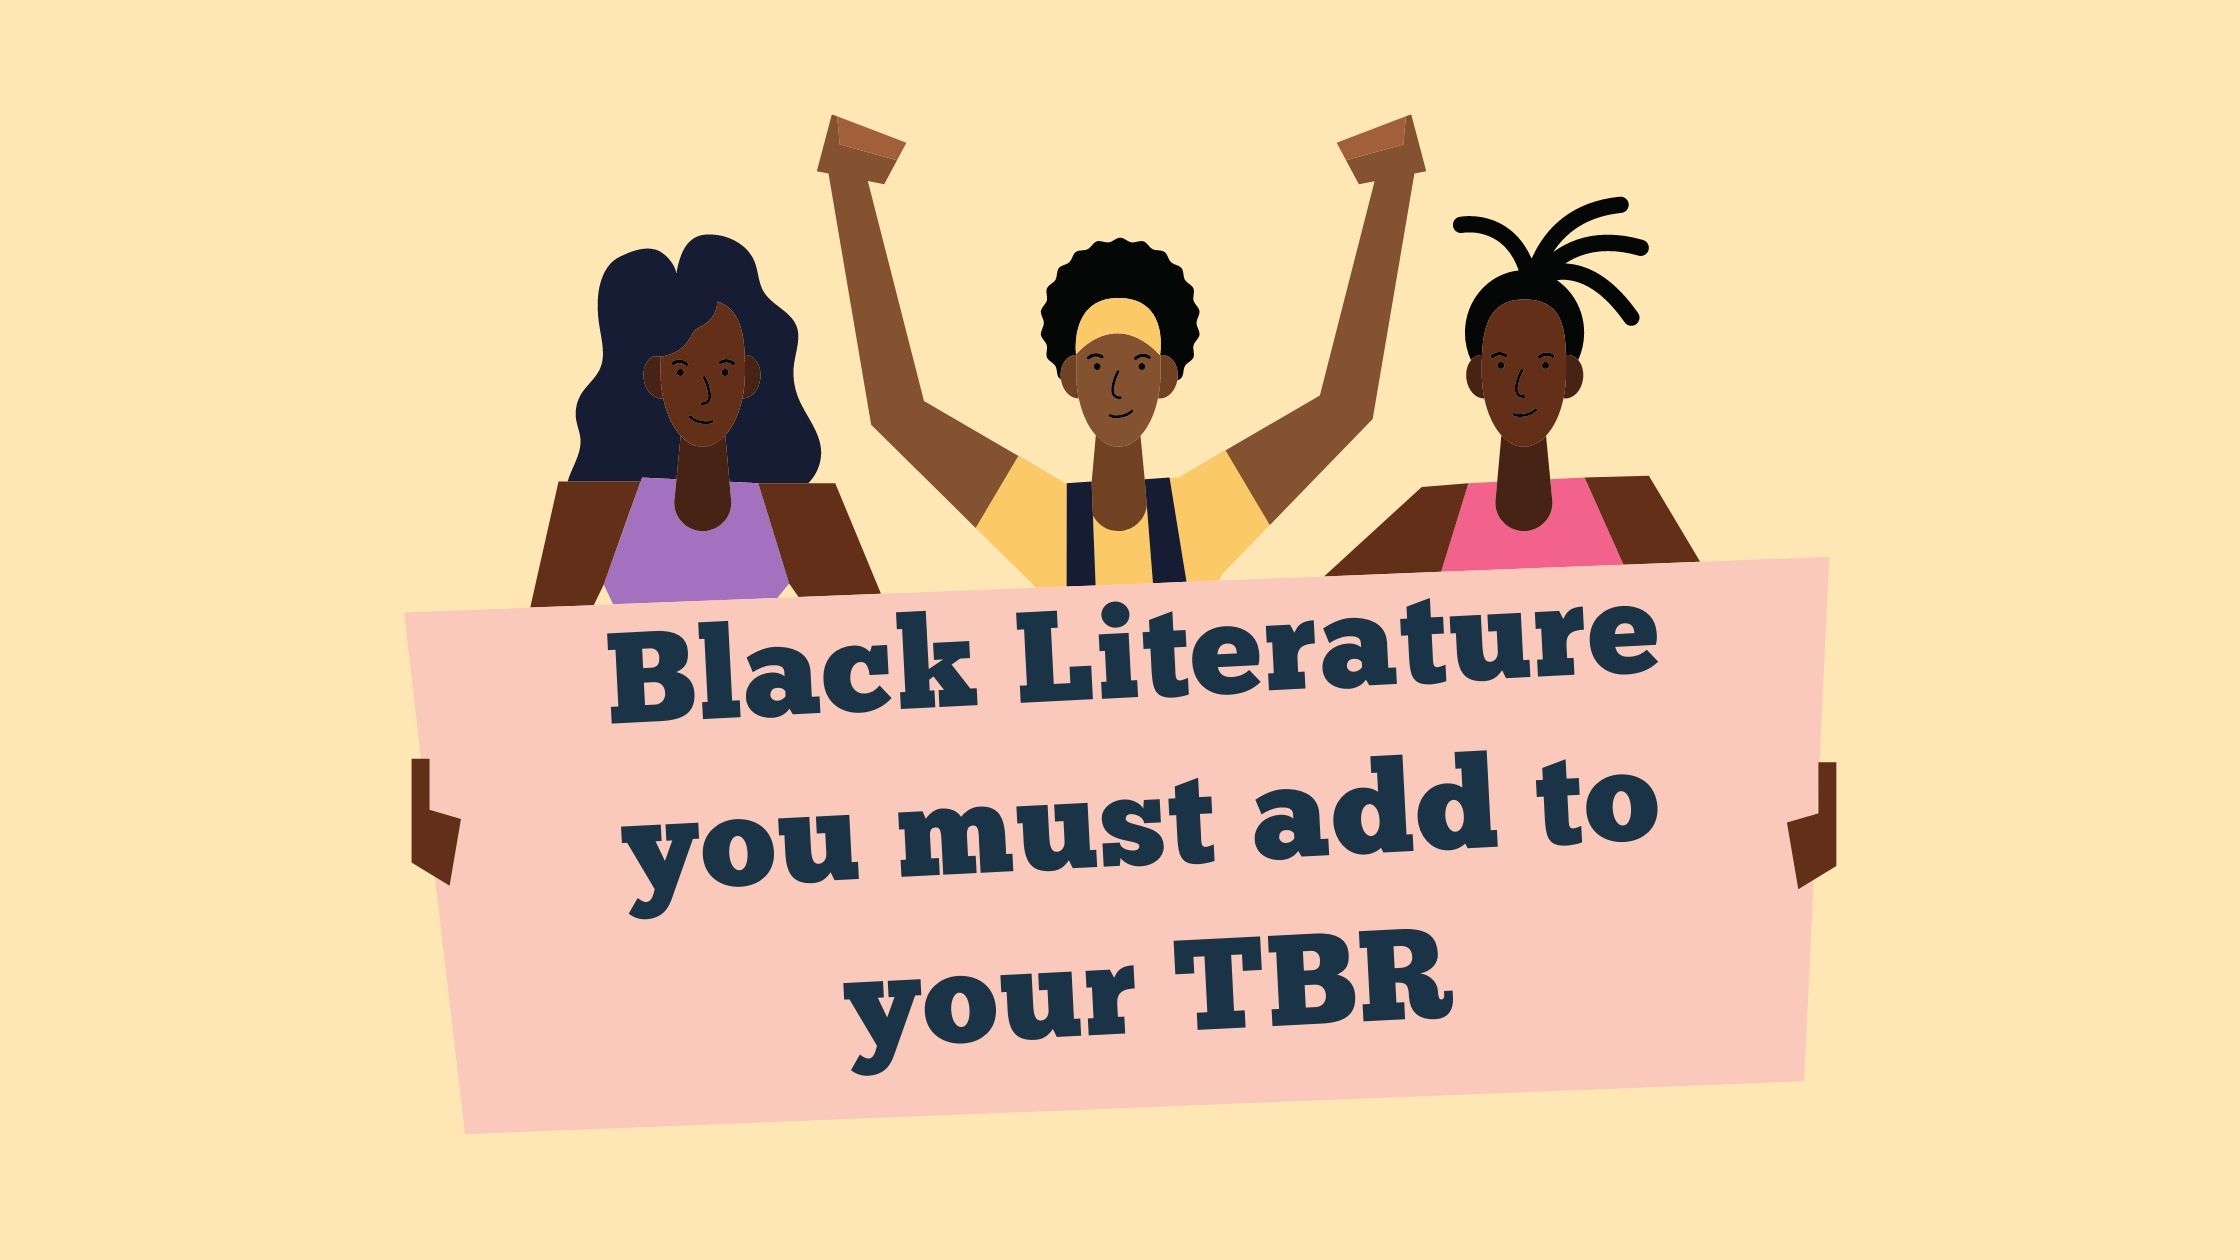 Black Literature you must add to your TBR